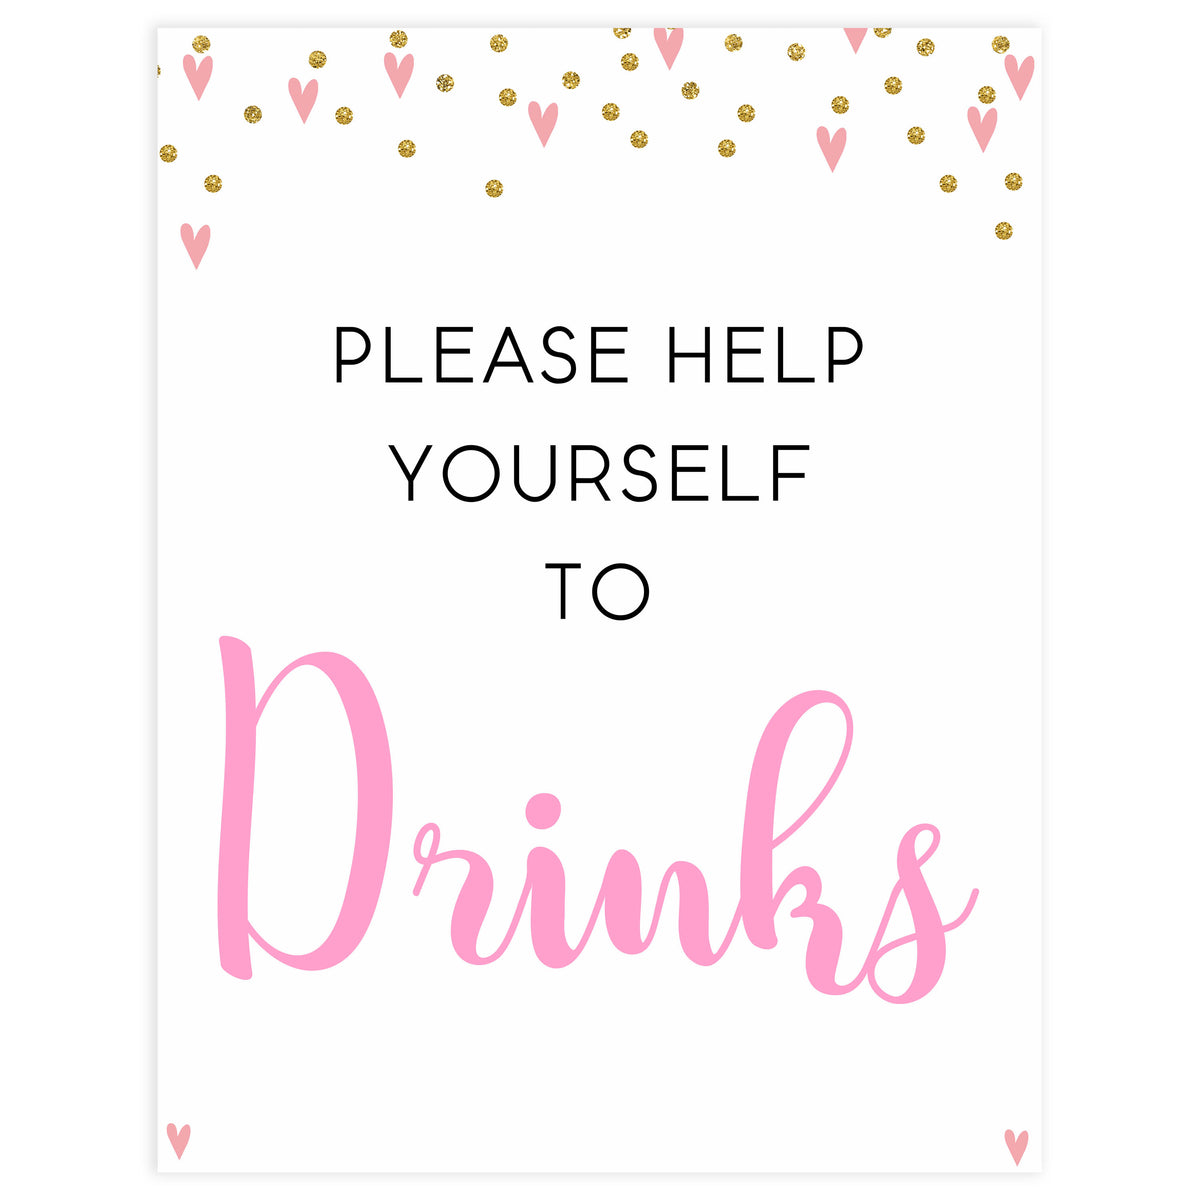 drinks baby signs, drinks baby table signs, Pink hearts baby decor, printable baby table signs, printable baby decor, gold glitter table signs, fun baby signs, pink hearts fun baby table signs